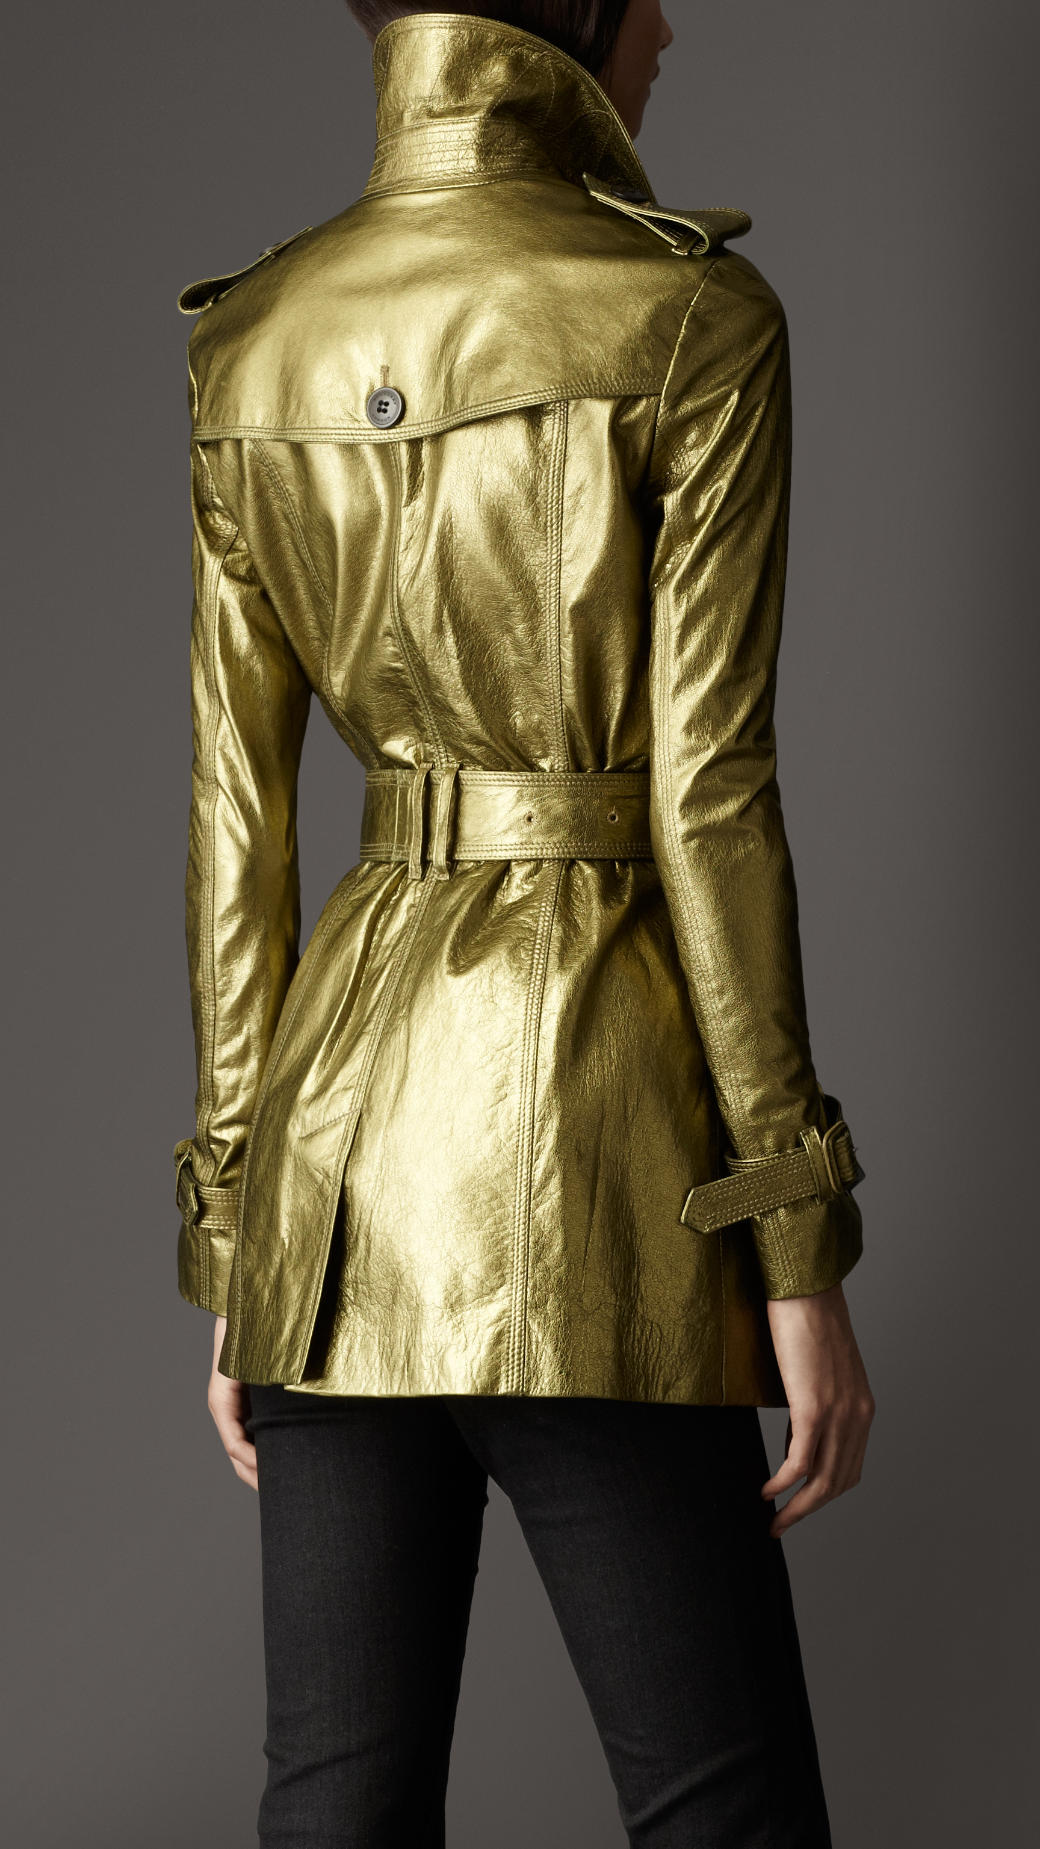 Burberry Short Metallic Leather Trench Coat in Green - Lyst